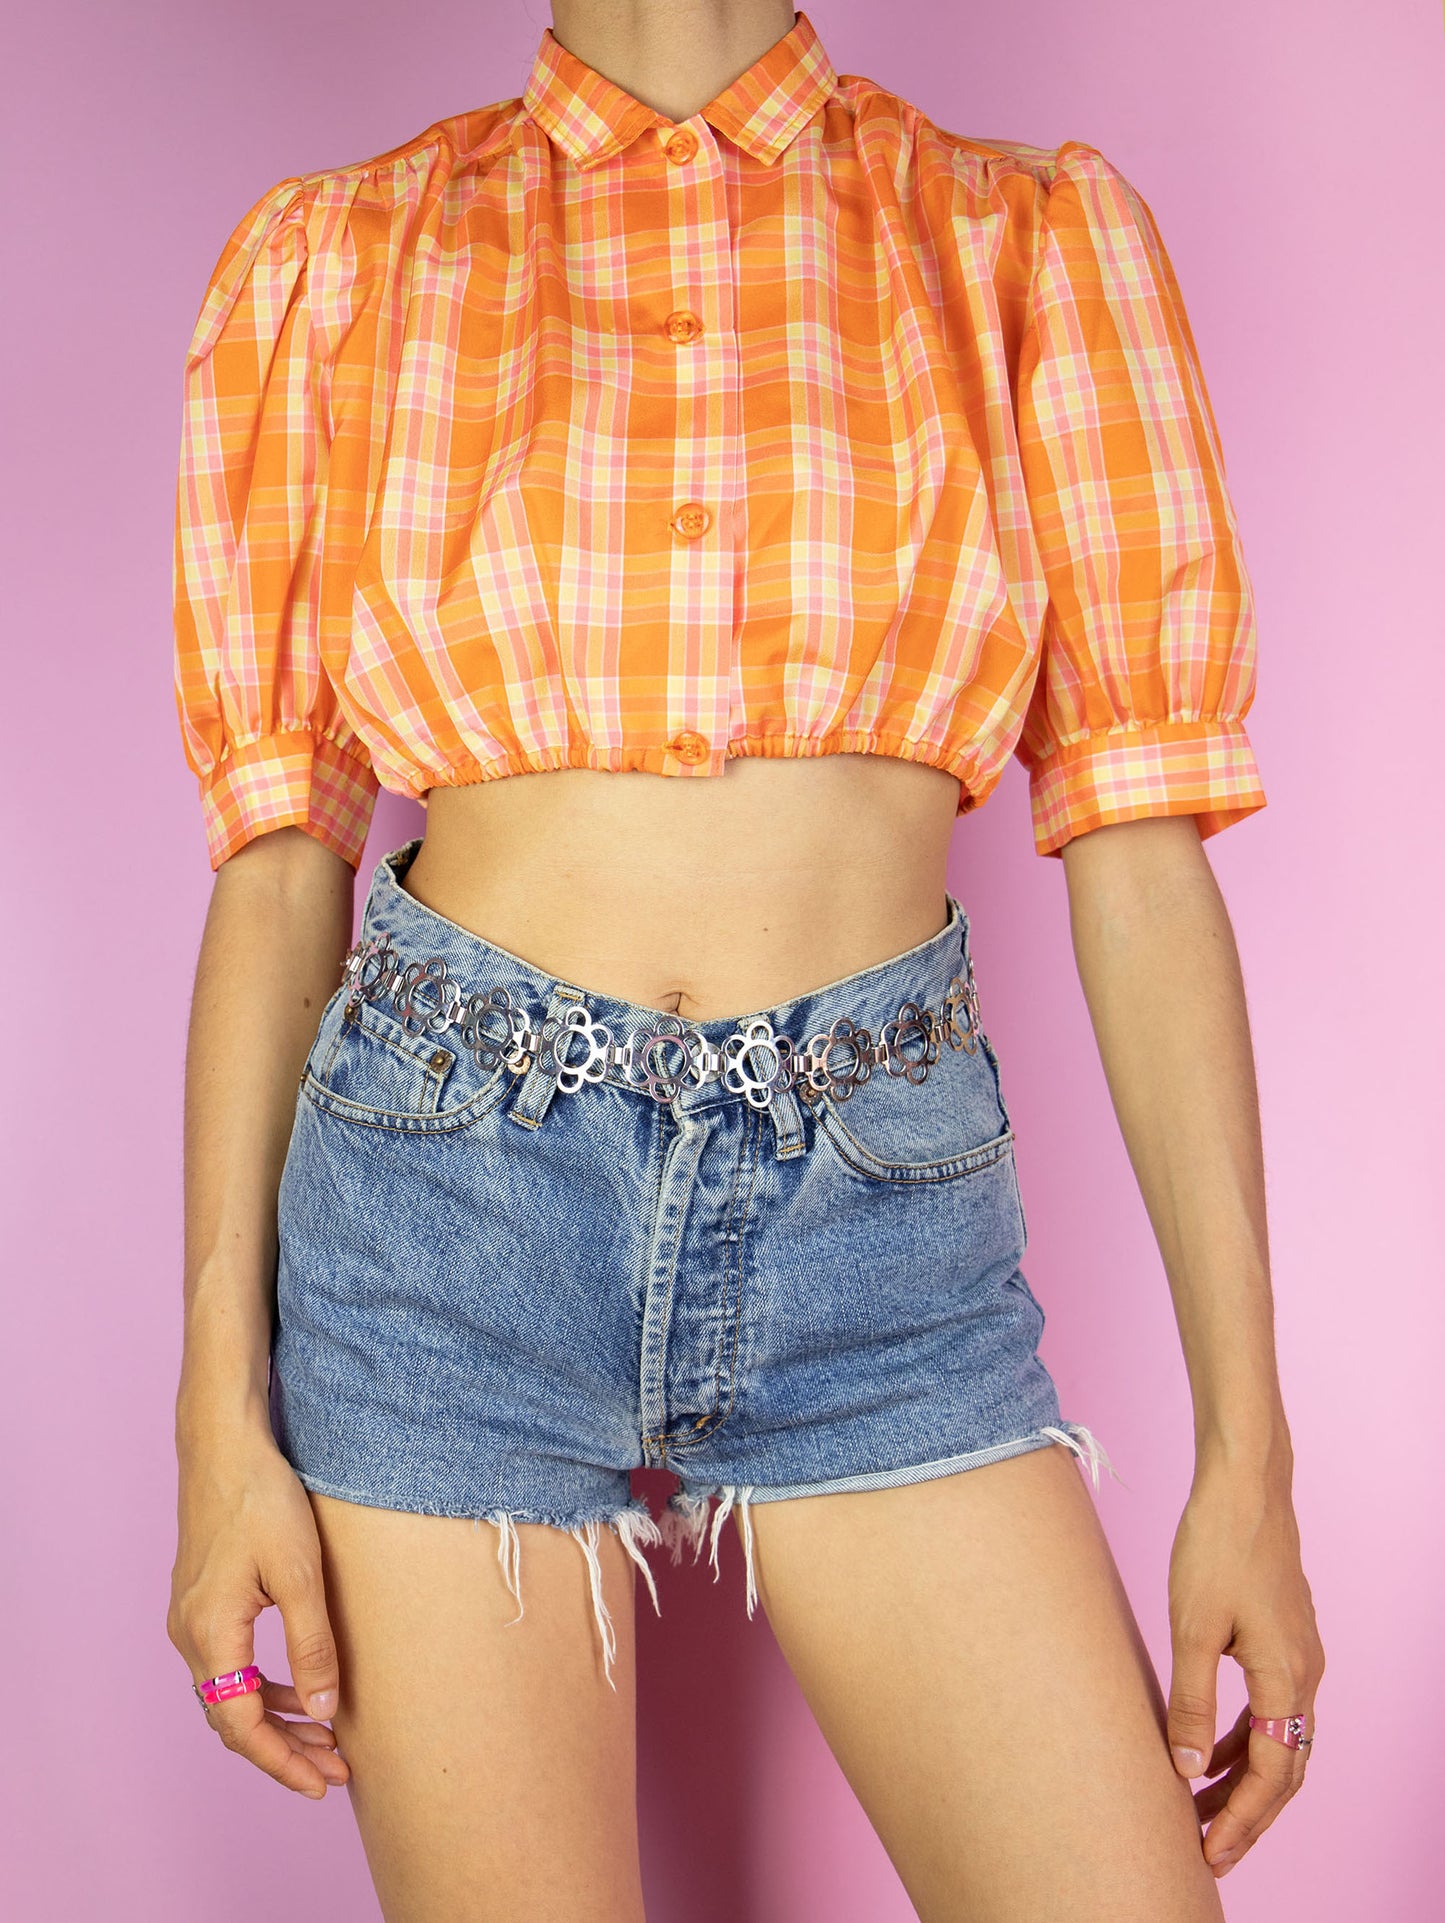 The Y2K Orange Plaid Crop Top is a vintage checkered cropped shirt with a collar, buttons, and puff sleeves. Cottage prairie 2000s country western summer gingham blouse.